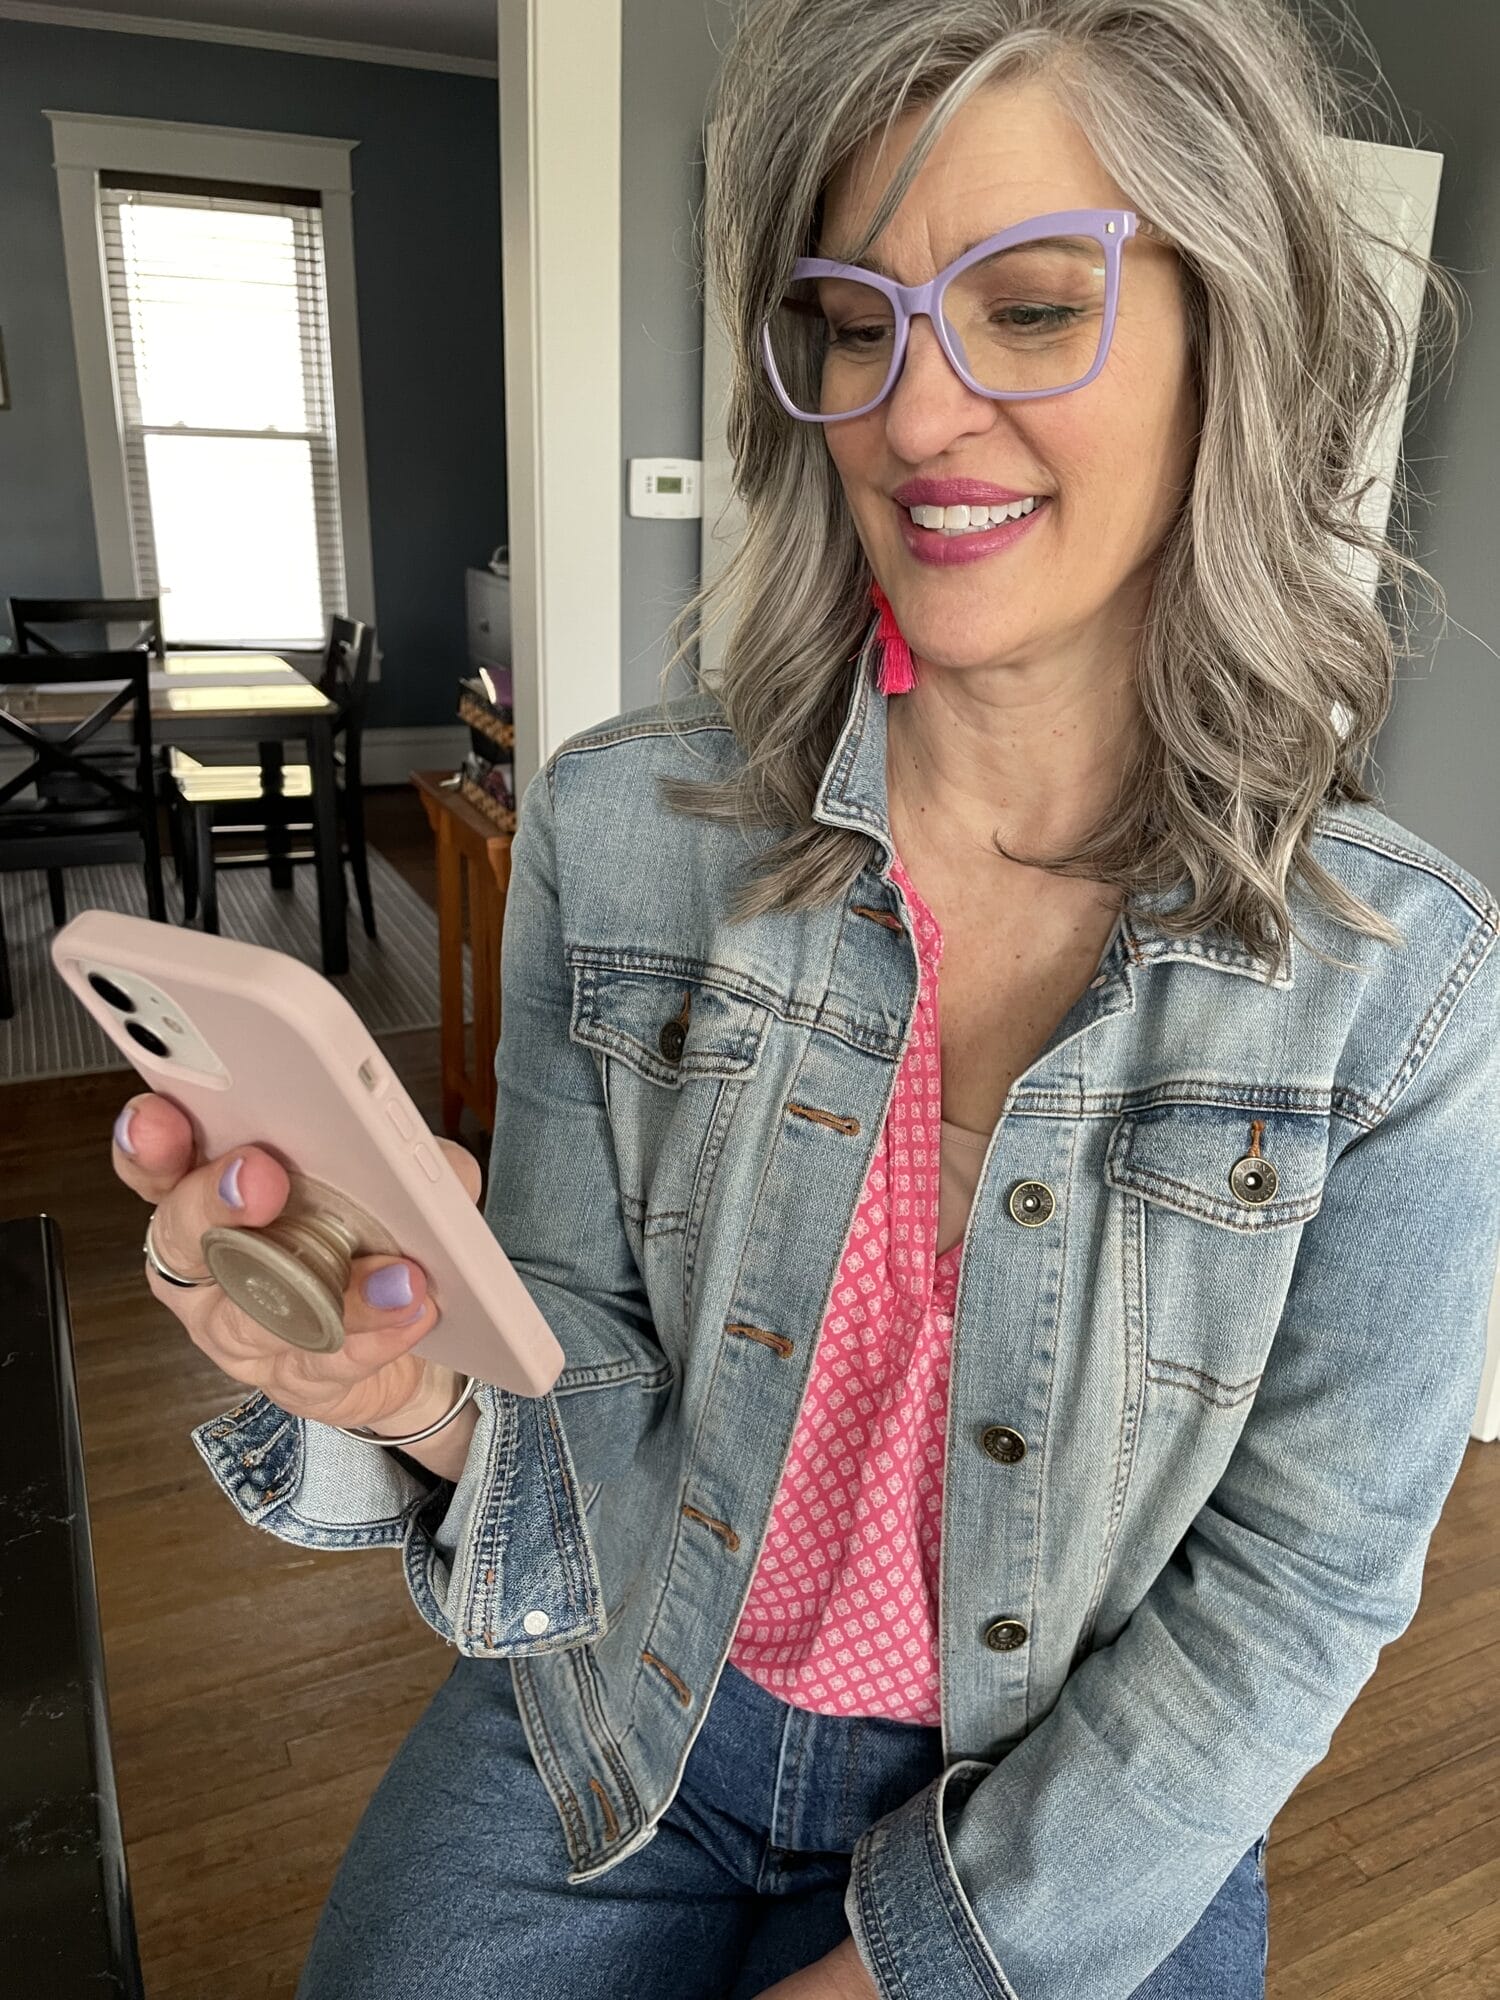 woman wearing pink top a denim jacket, and big glasses looking at her cell phone in her house